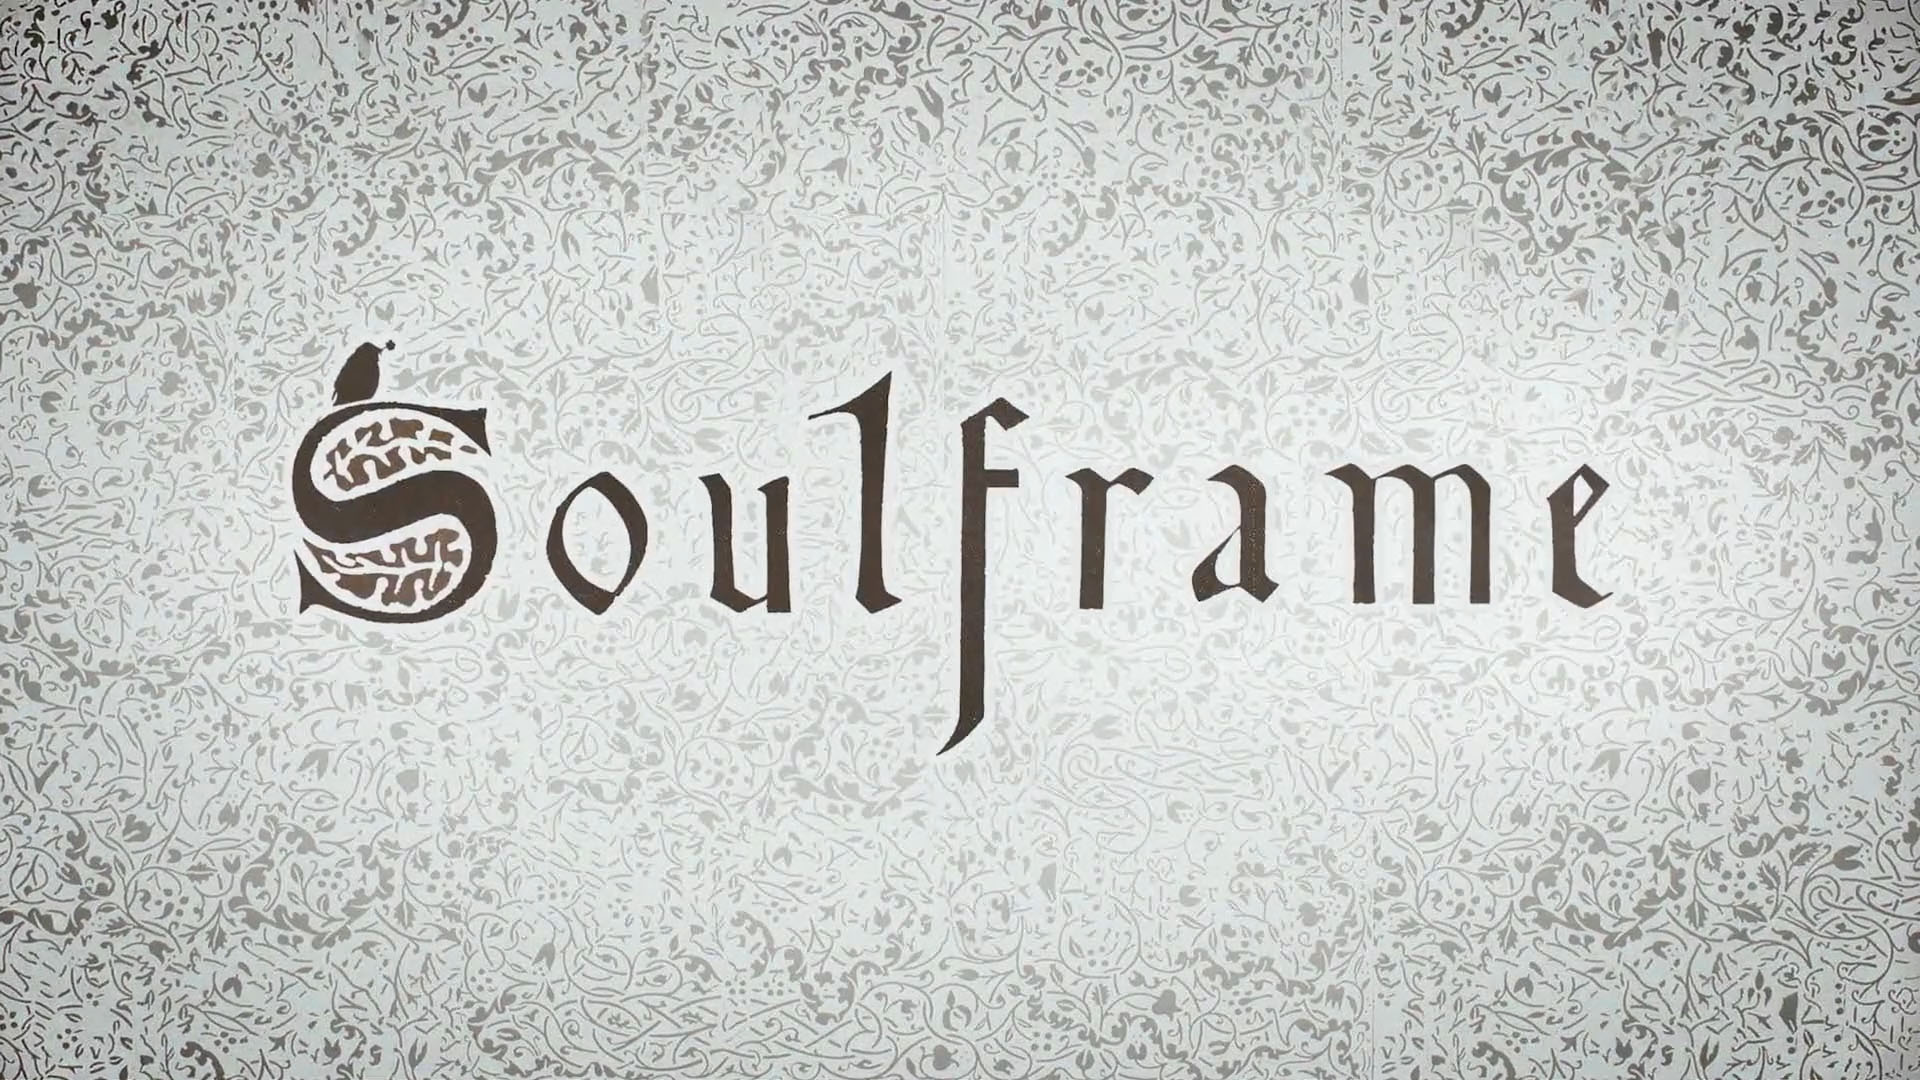 Soulframe is a new free-to-play MMORPG from Warframe devs